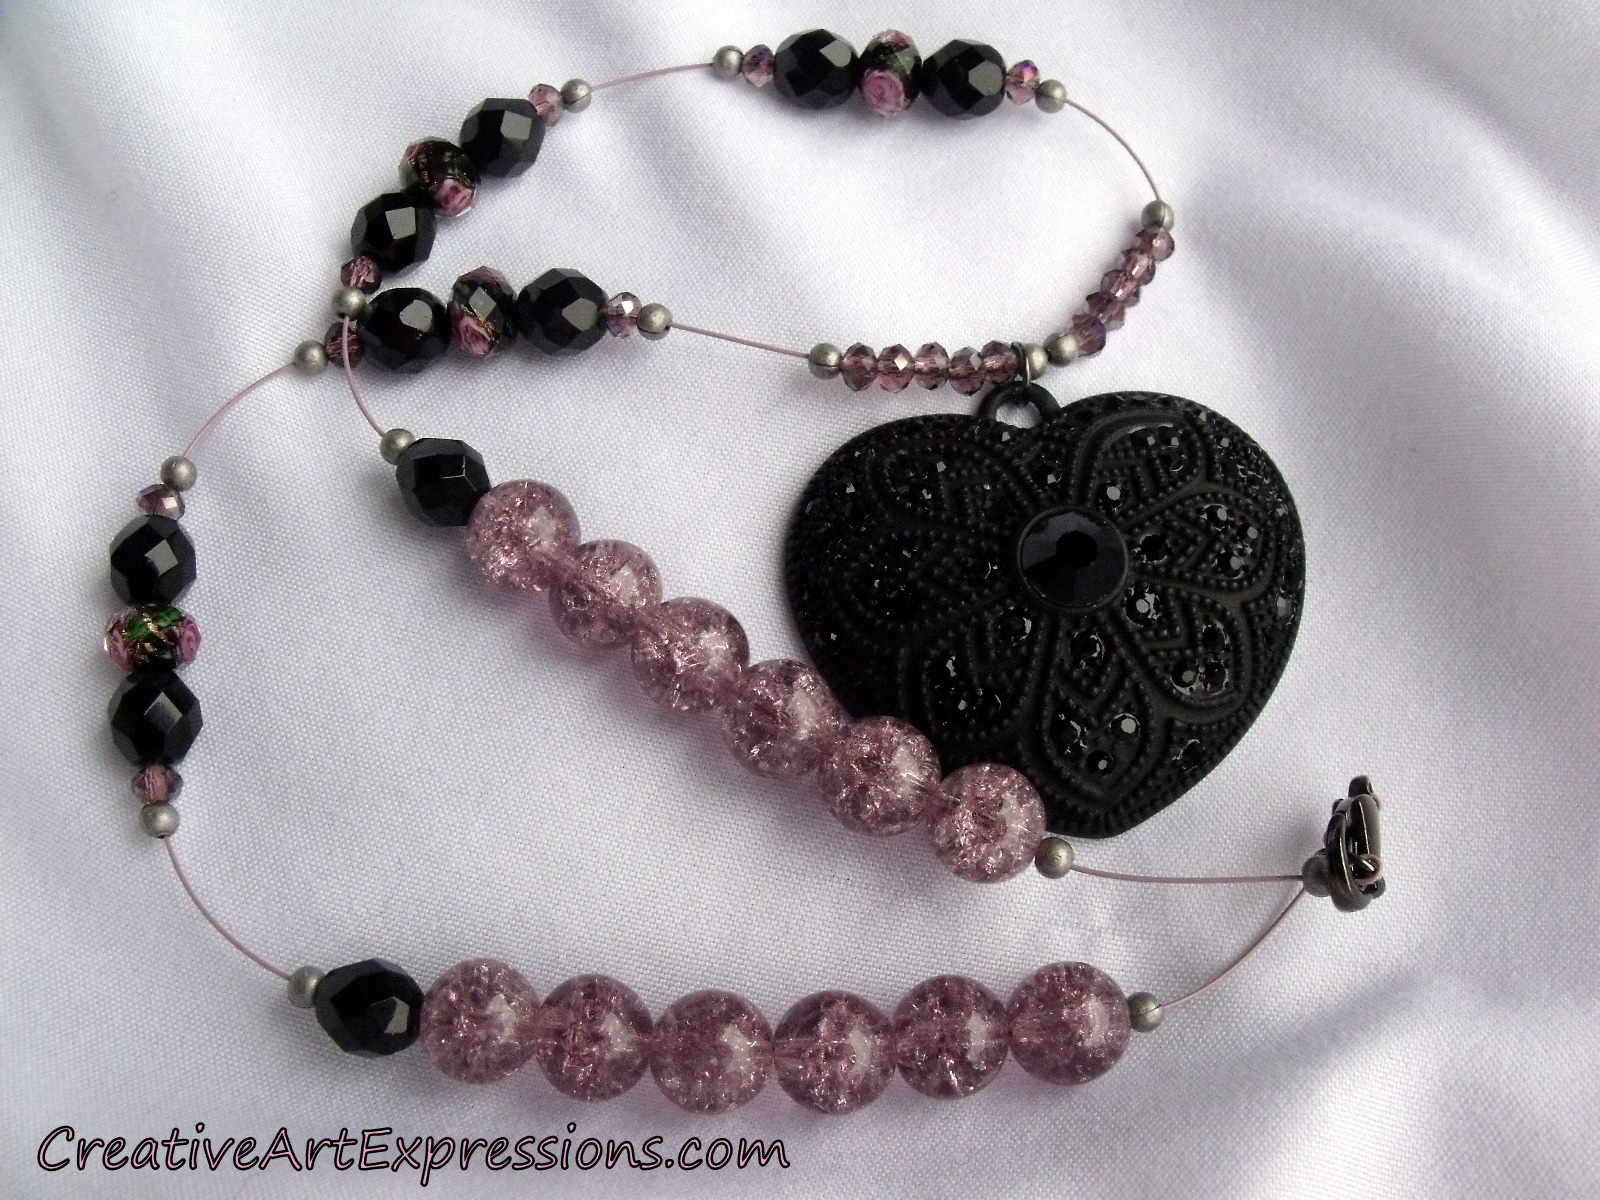 Creative Art Expressions Handmade Black & Pink Heart Necklace Jewelry Design